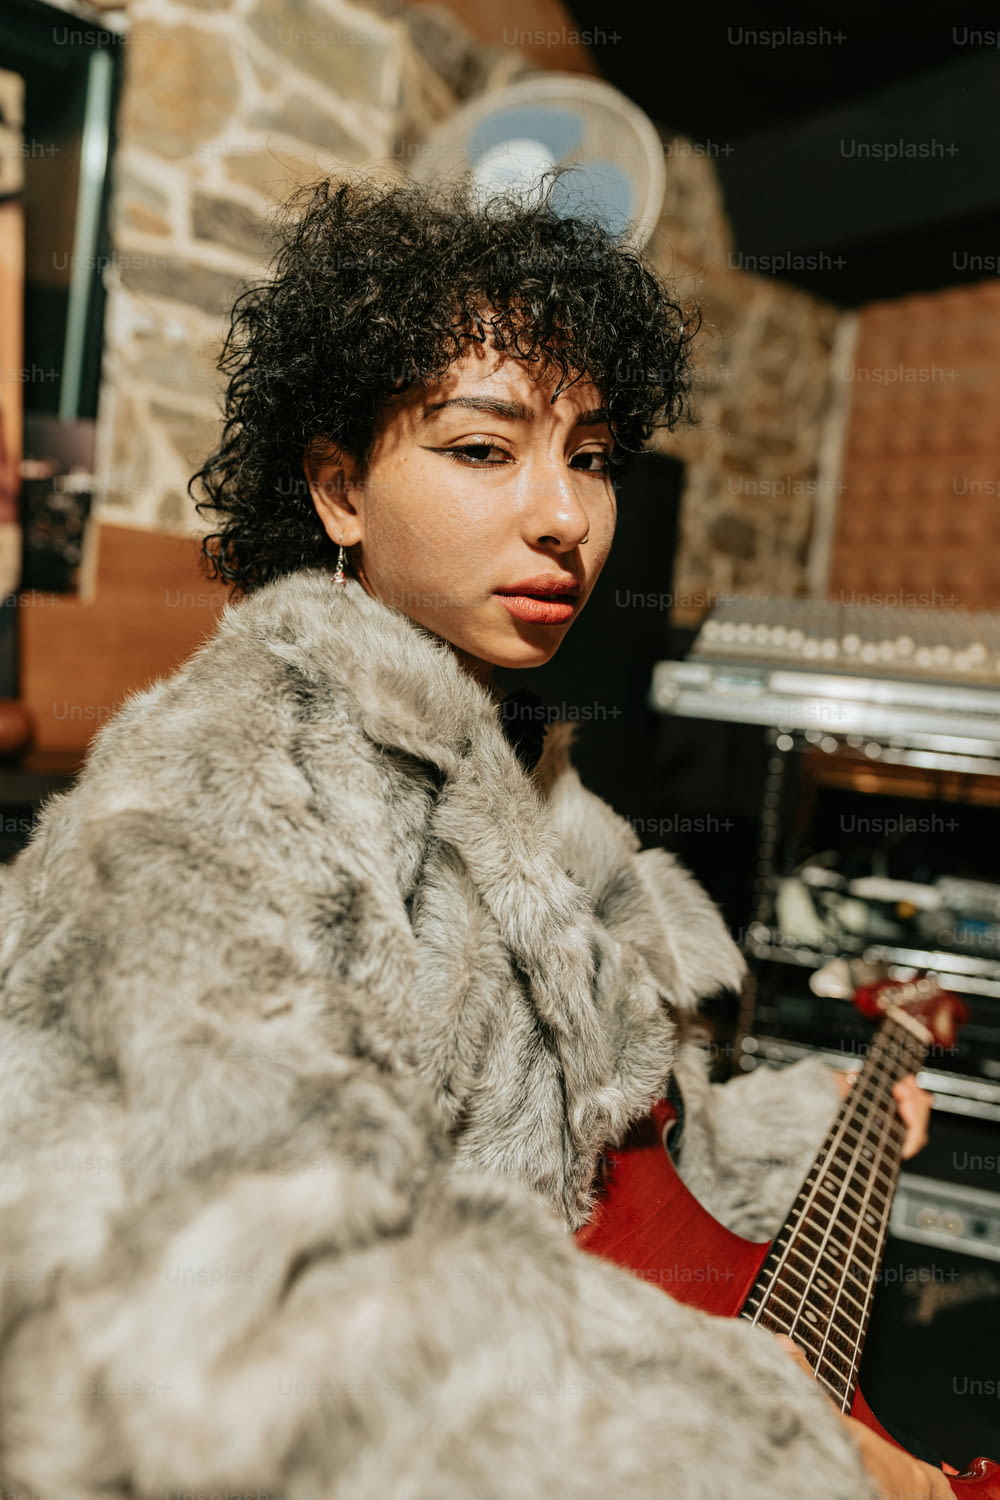 a woman in a fur coat holding a guitar